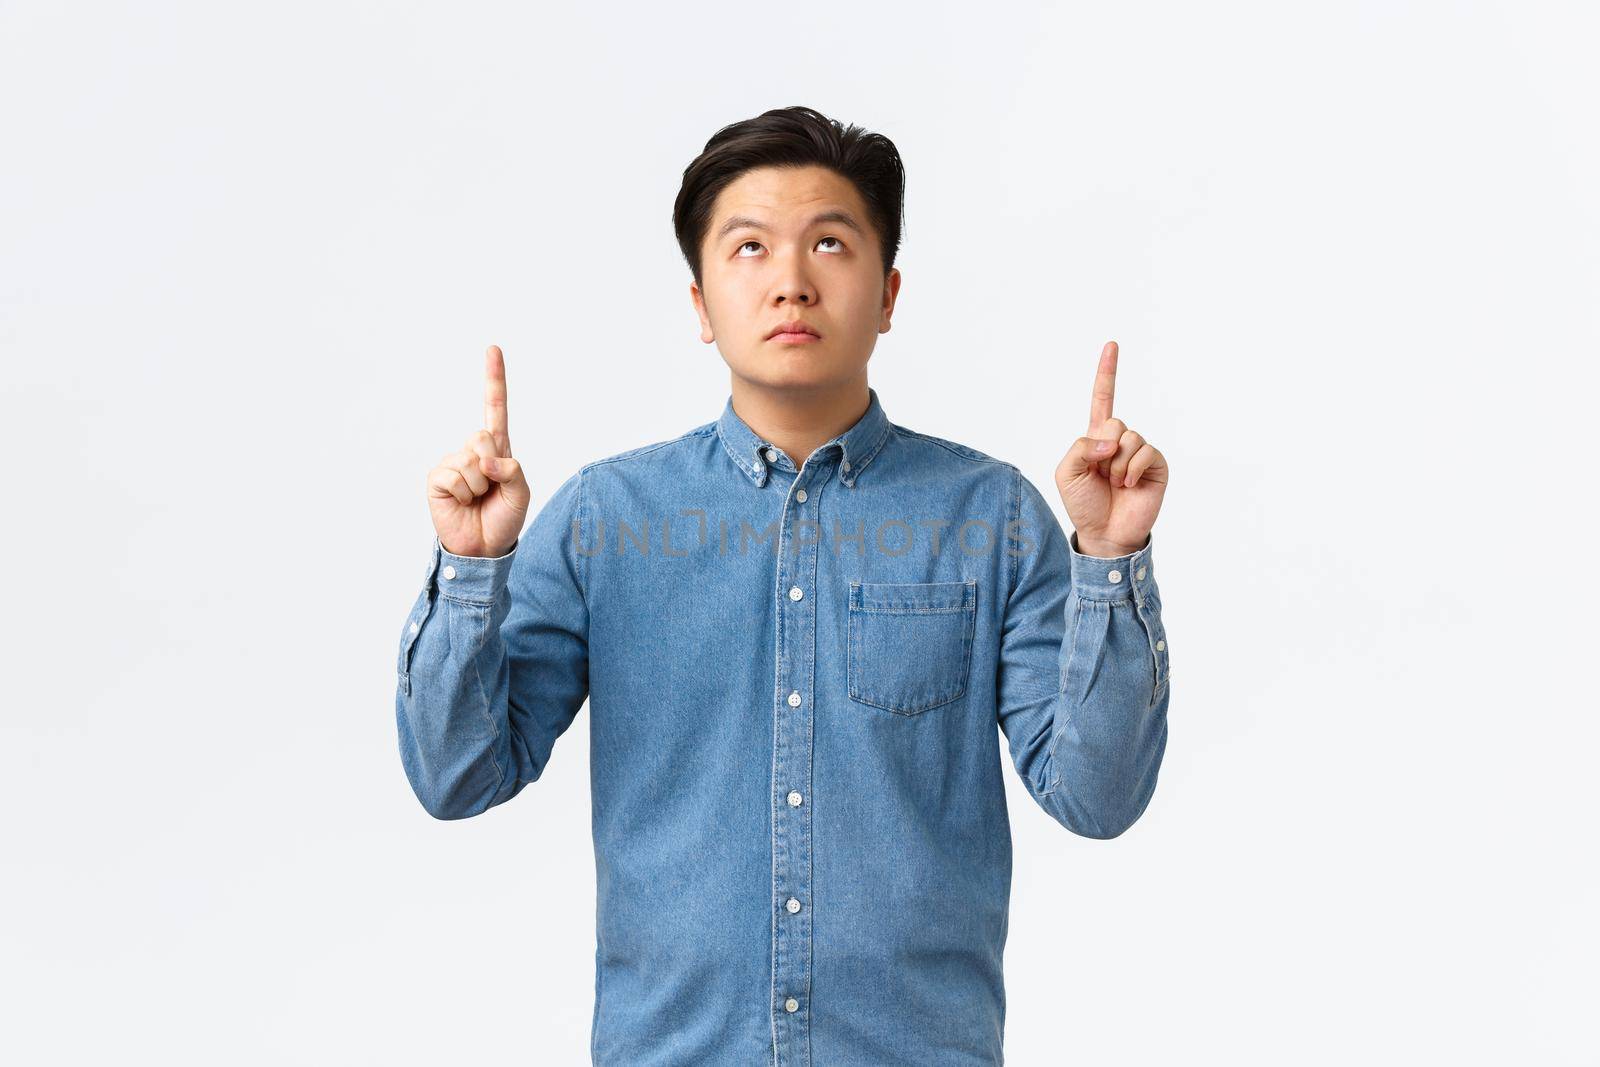 Unamused bored asian guy in blue shirt, looking and pointing fingers up with poker face, no emotions, being careless about information upwards, reading sign without interest, white background.